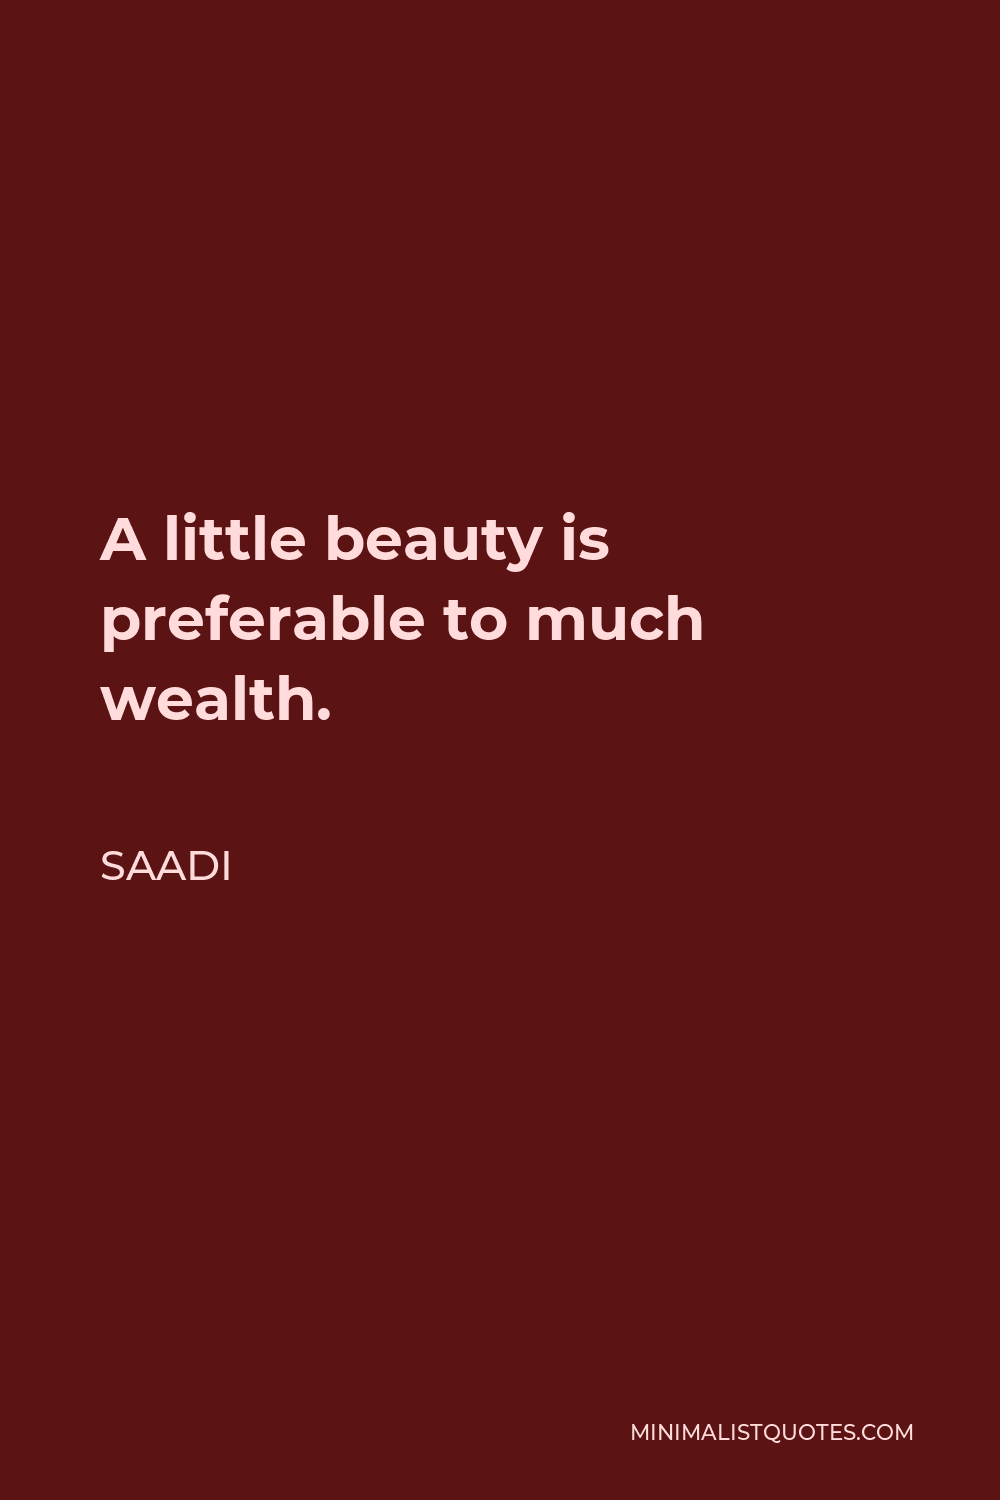 Saadi Quote - A little beauty is preferable to much wealth.